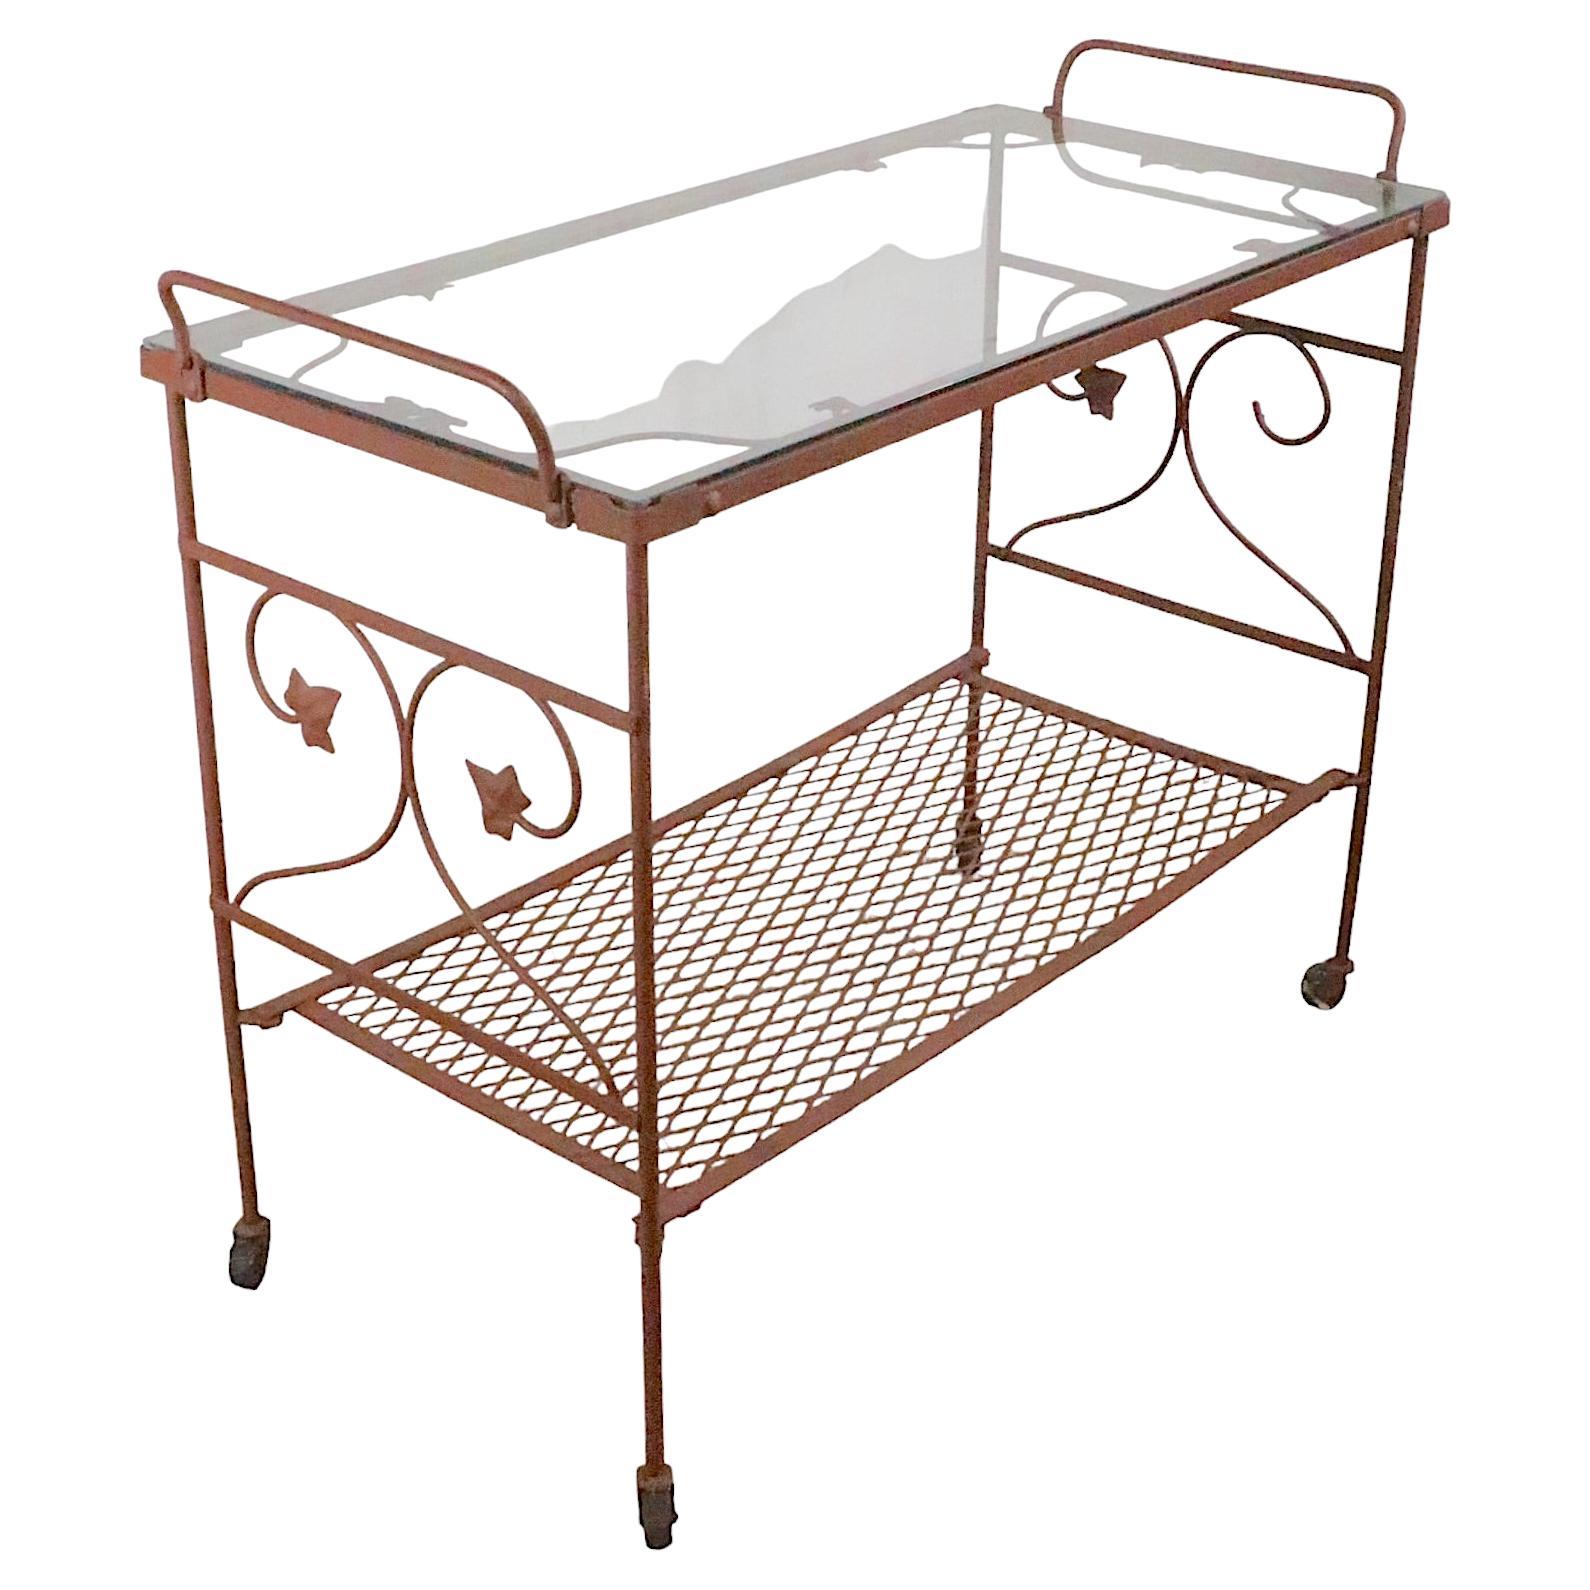 Wrought Iron and Glass Garden Patio Poolside Serving Bar Cart, c 1950- 1970s 